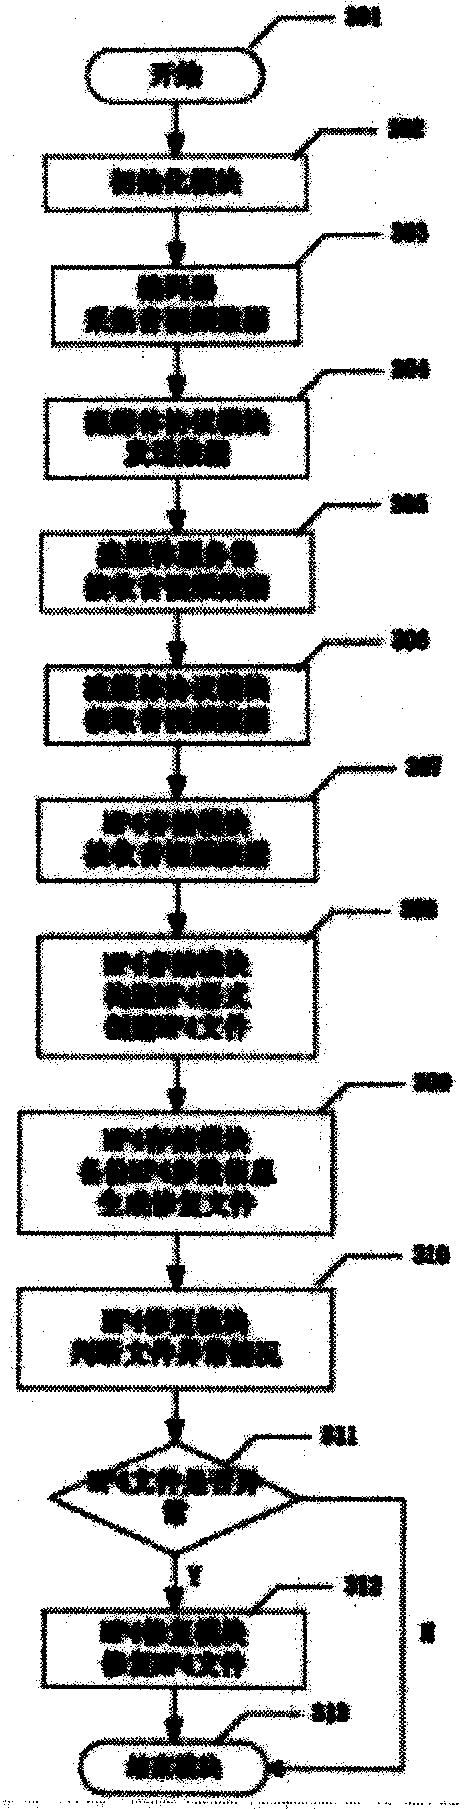 High-reliability streaming media storage system and method thereof